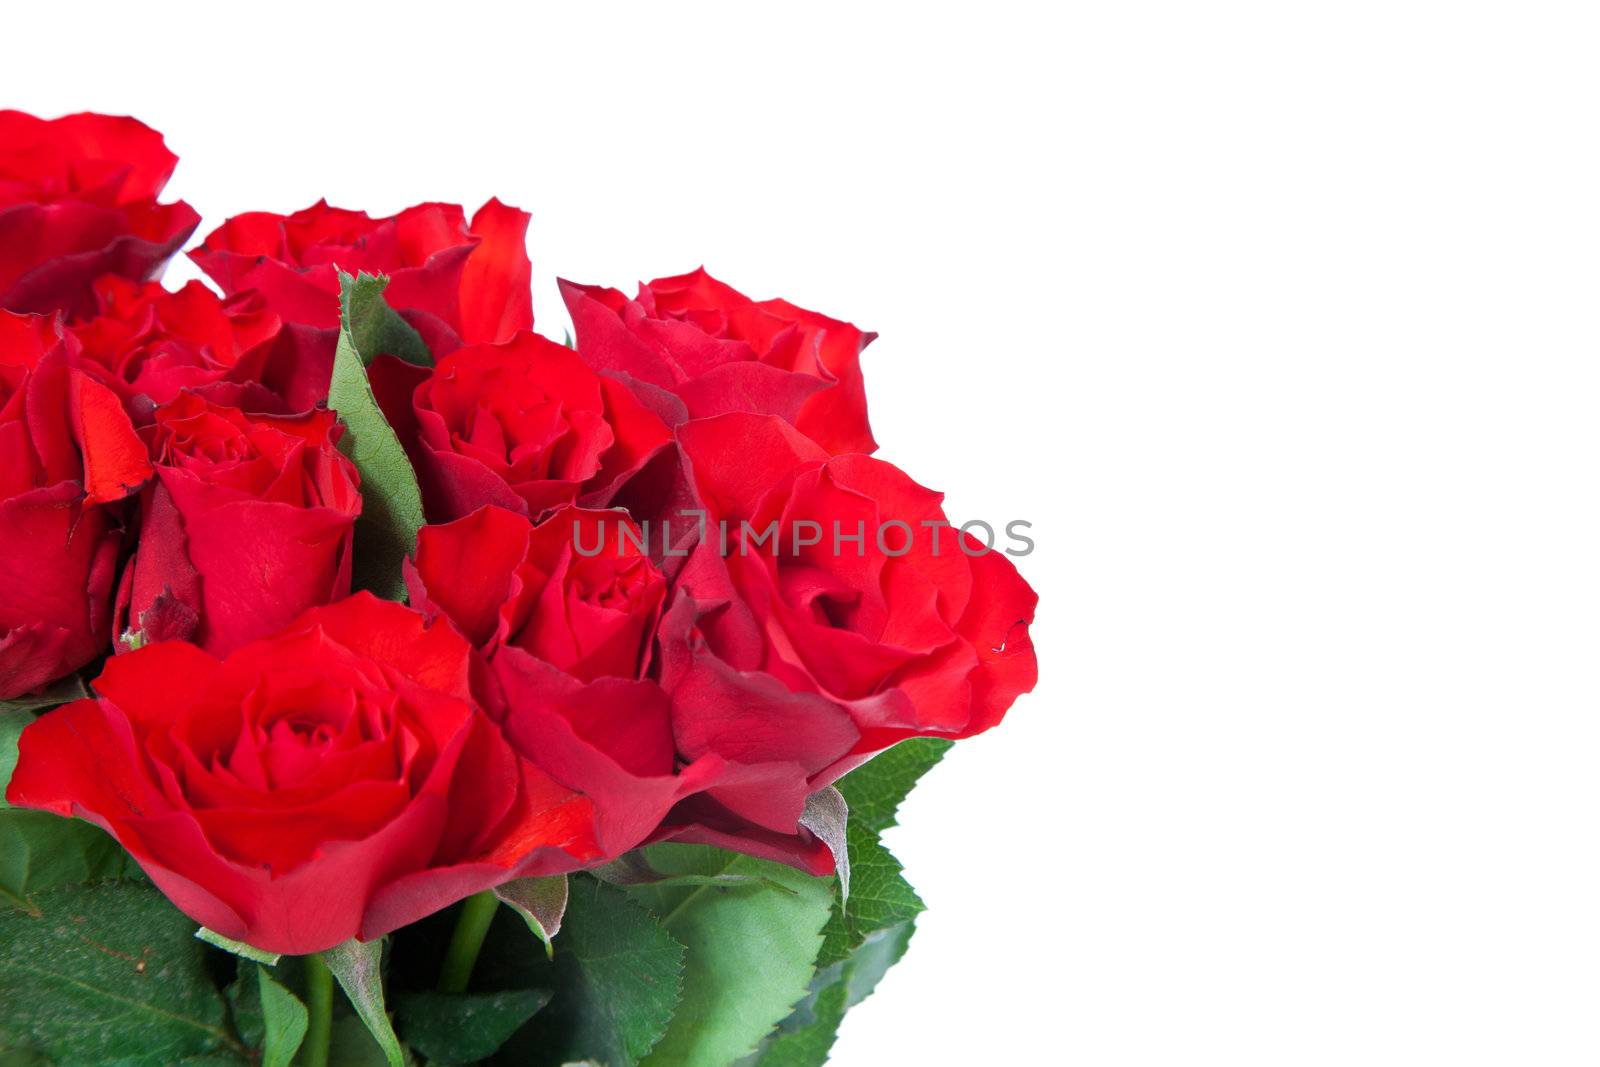 Bunch of red roses. All on white background.